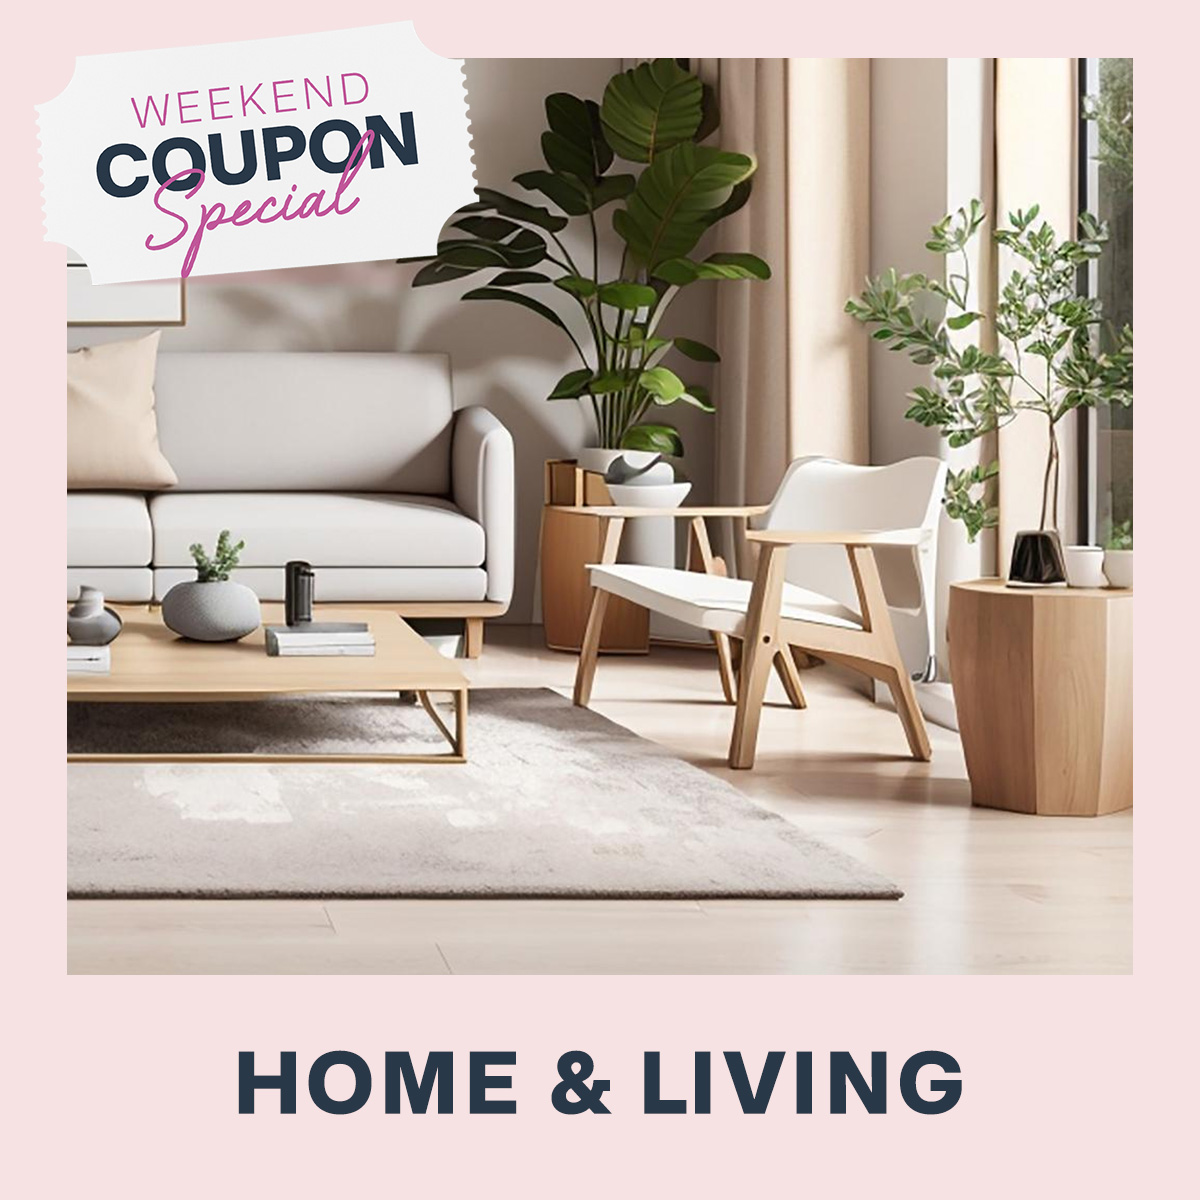 Weekend Home Coupon Special